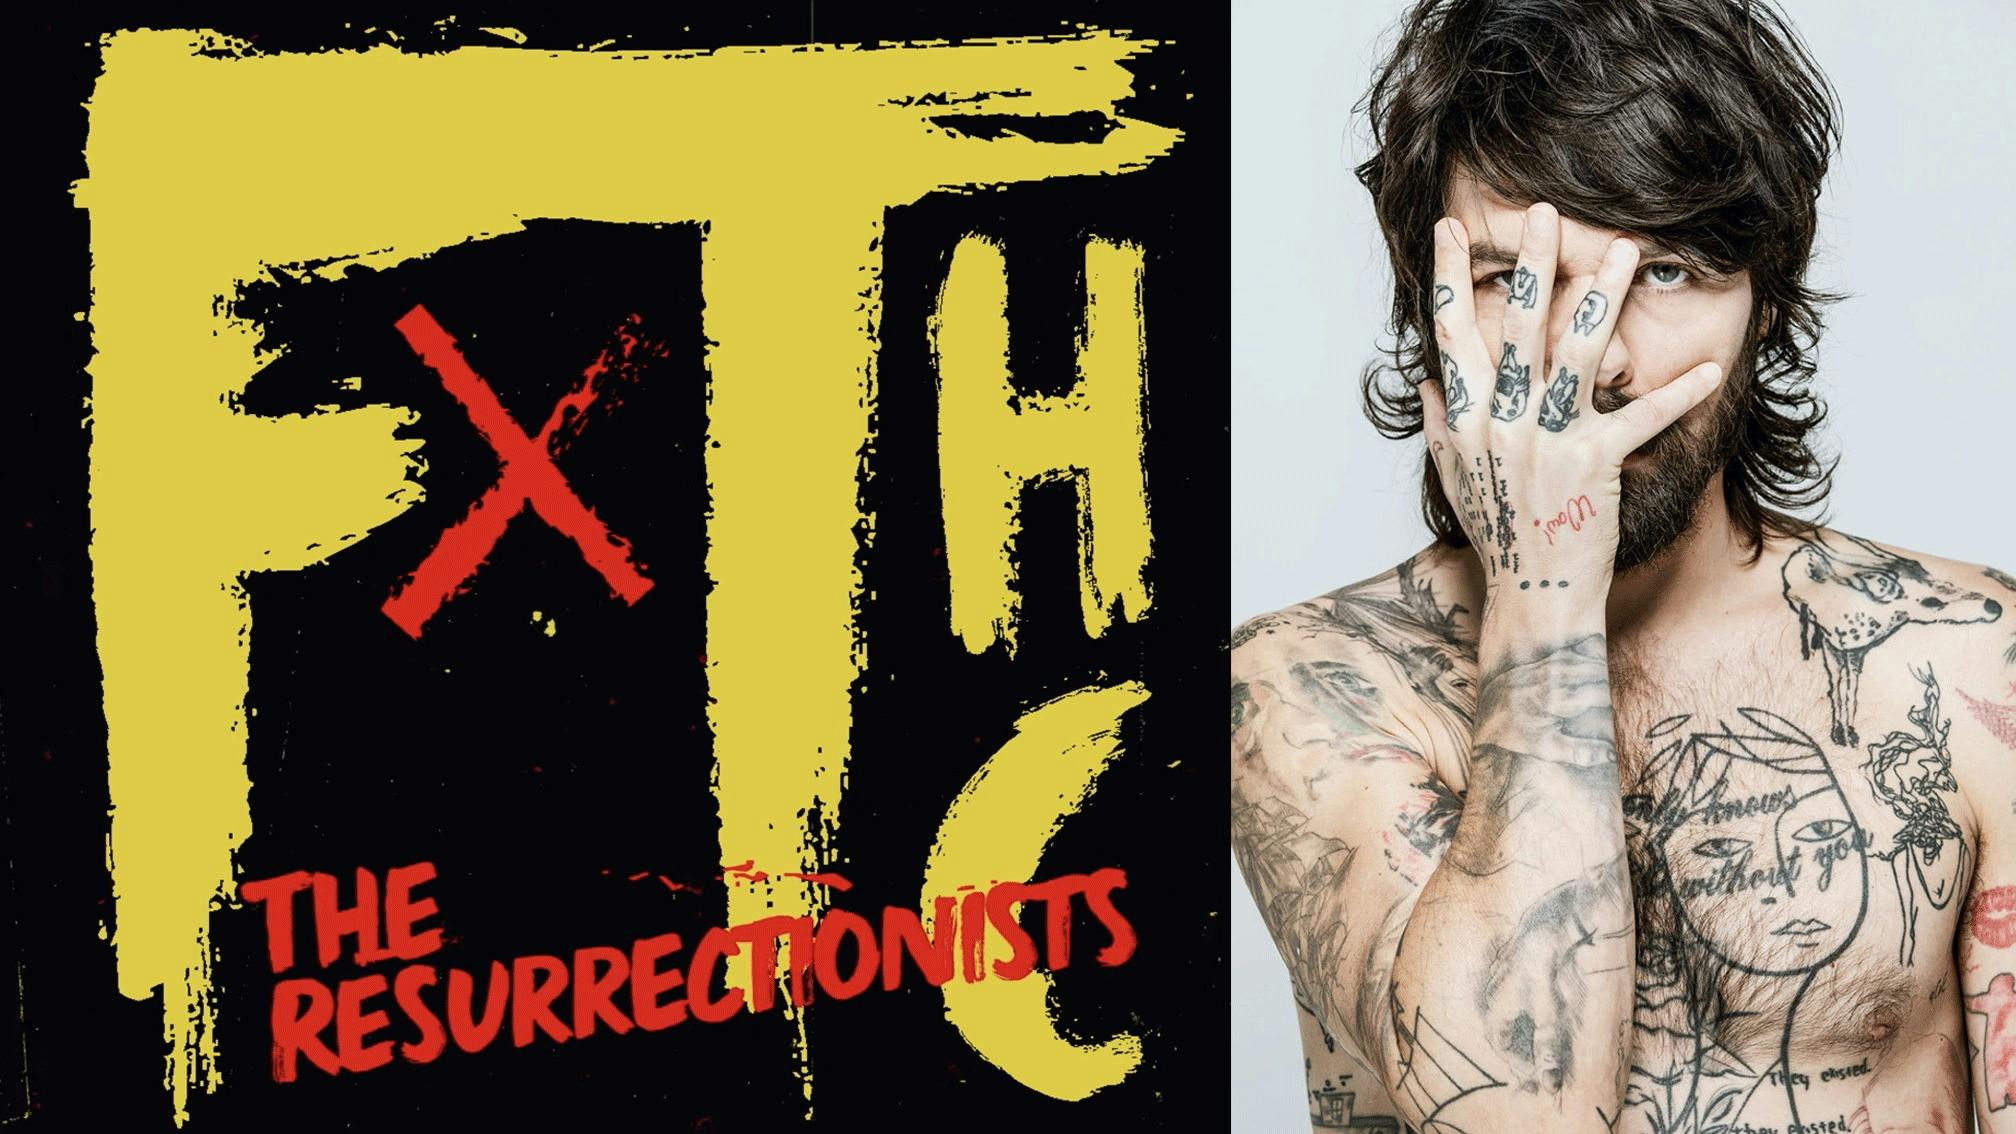 Frank Turner releases The Resurrectionists featuring Biffy Clyro’s Simon Neil